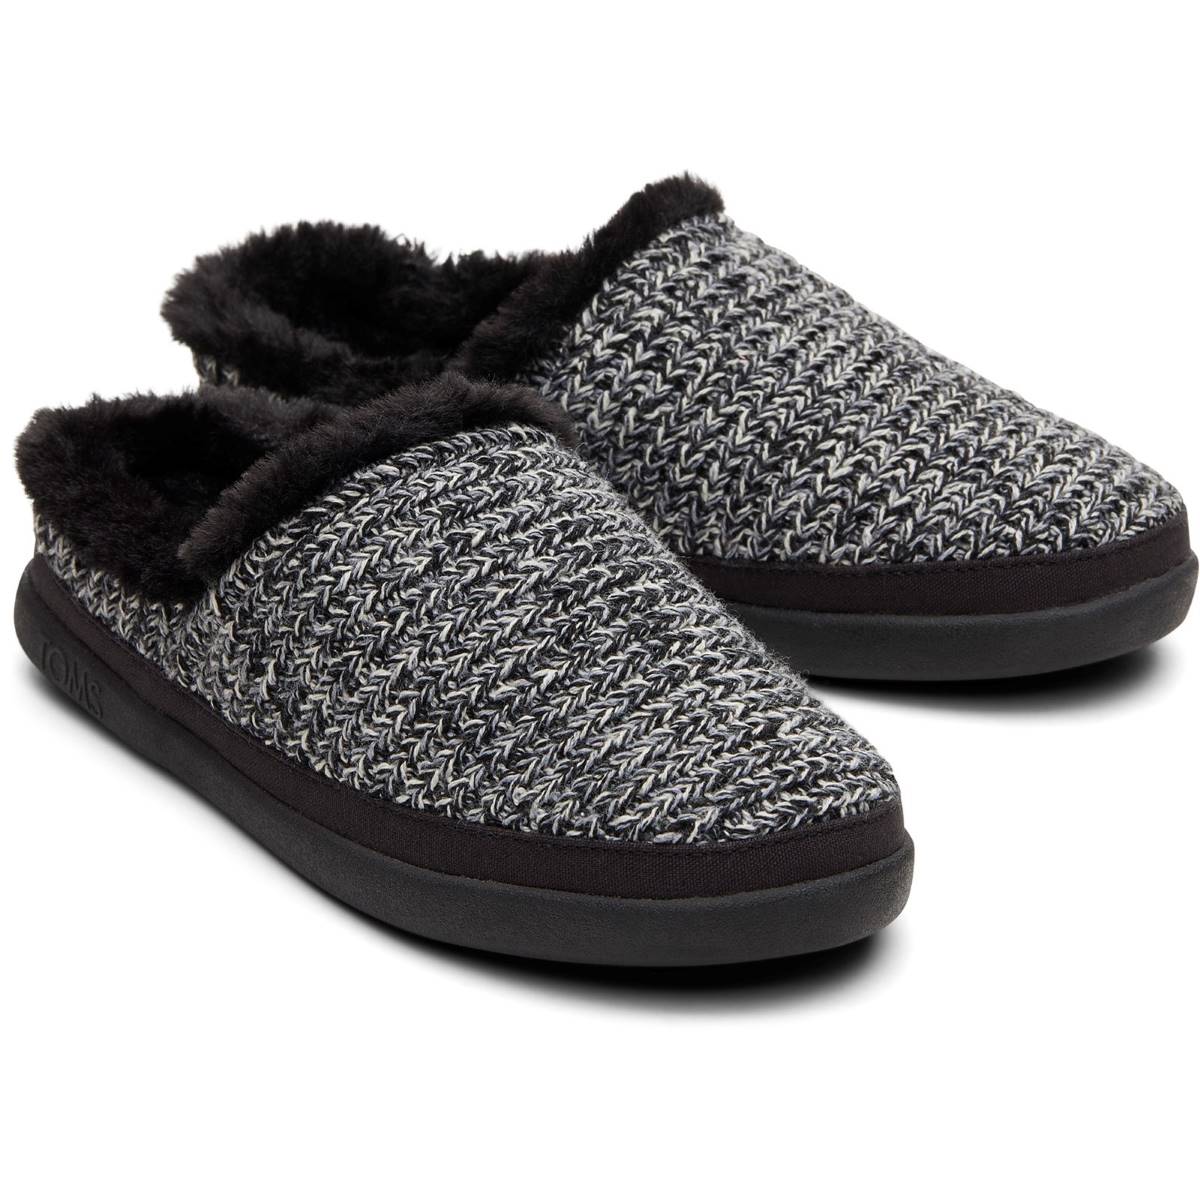 Toms Sage Black Womens slippers 10016805 in a Plain Textile in Size 8